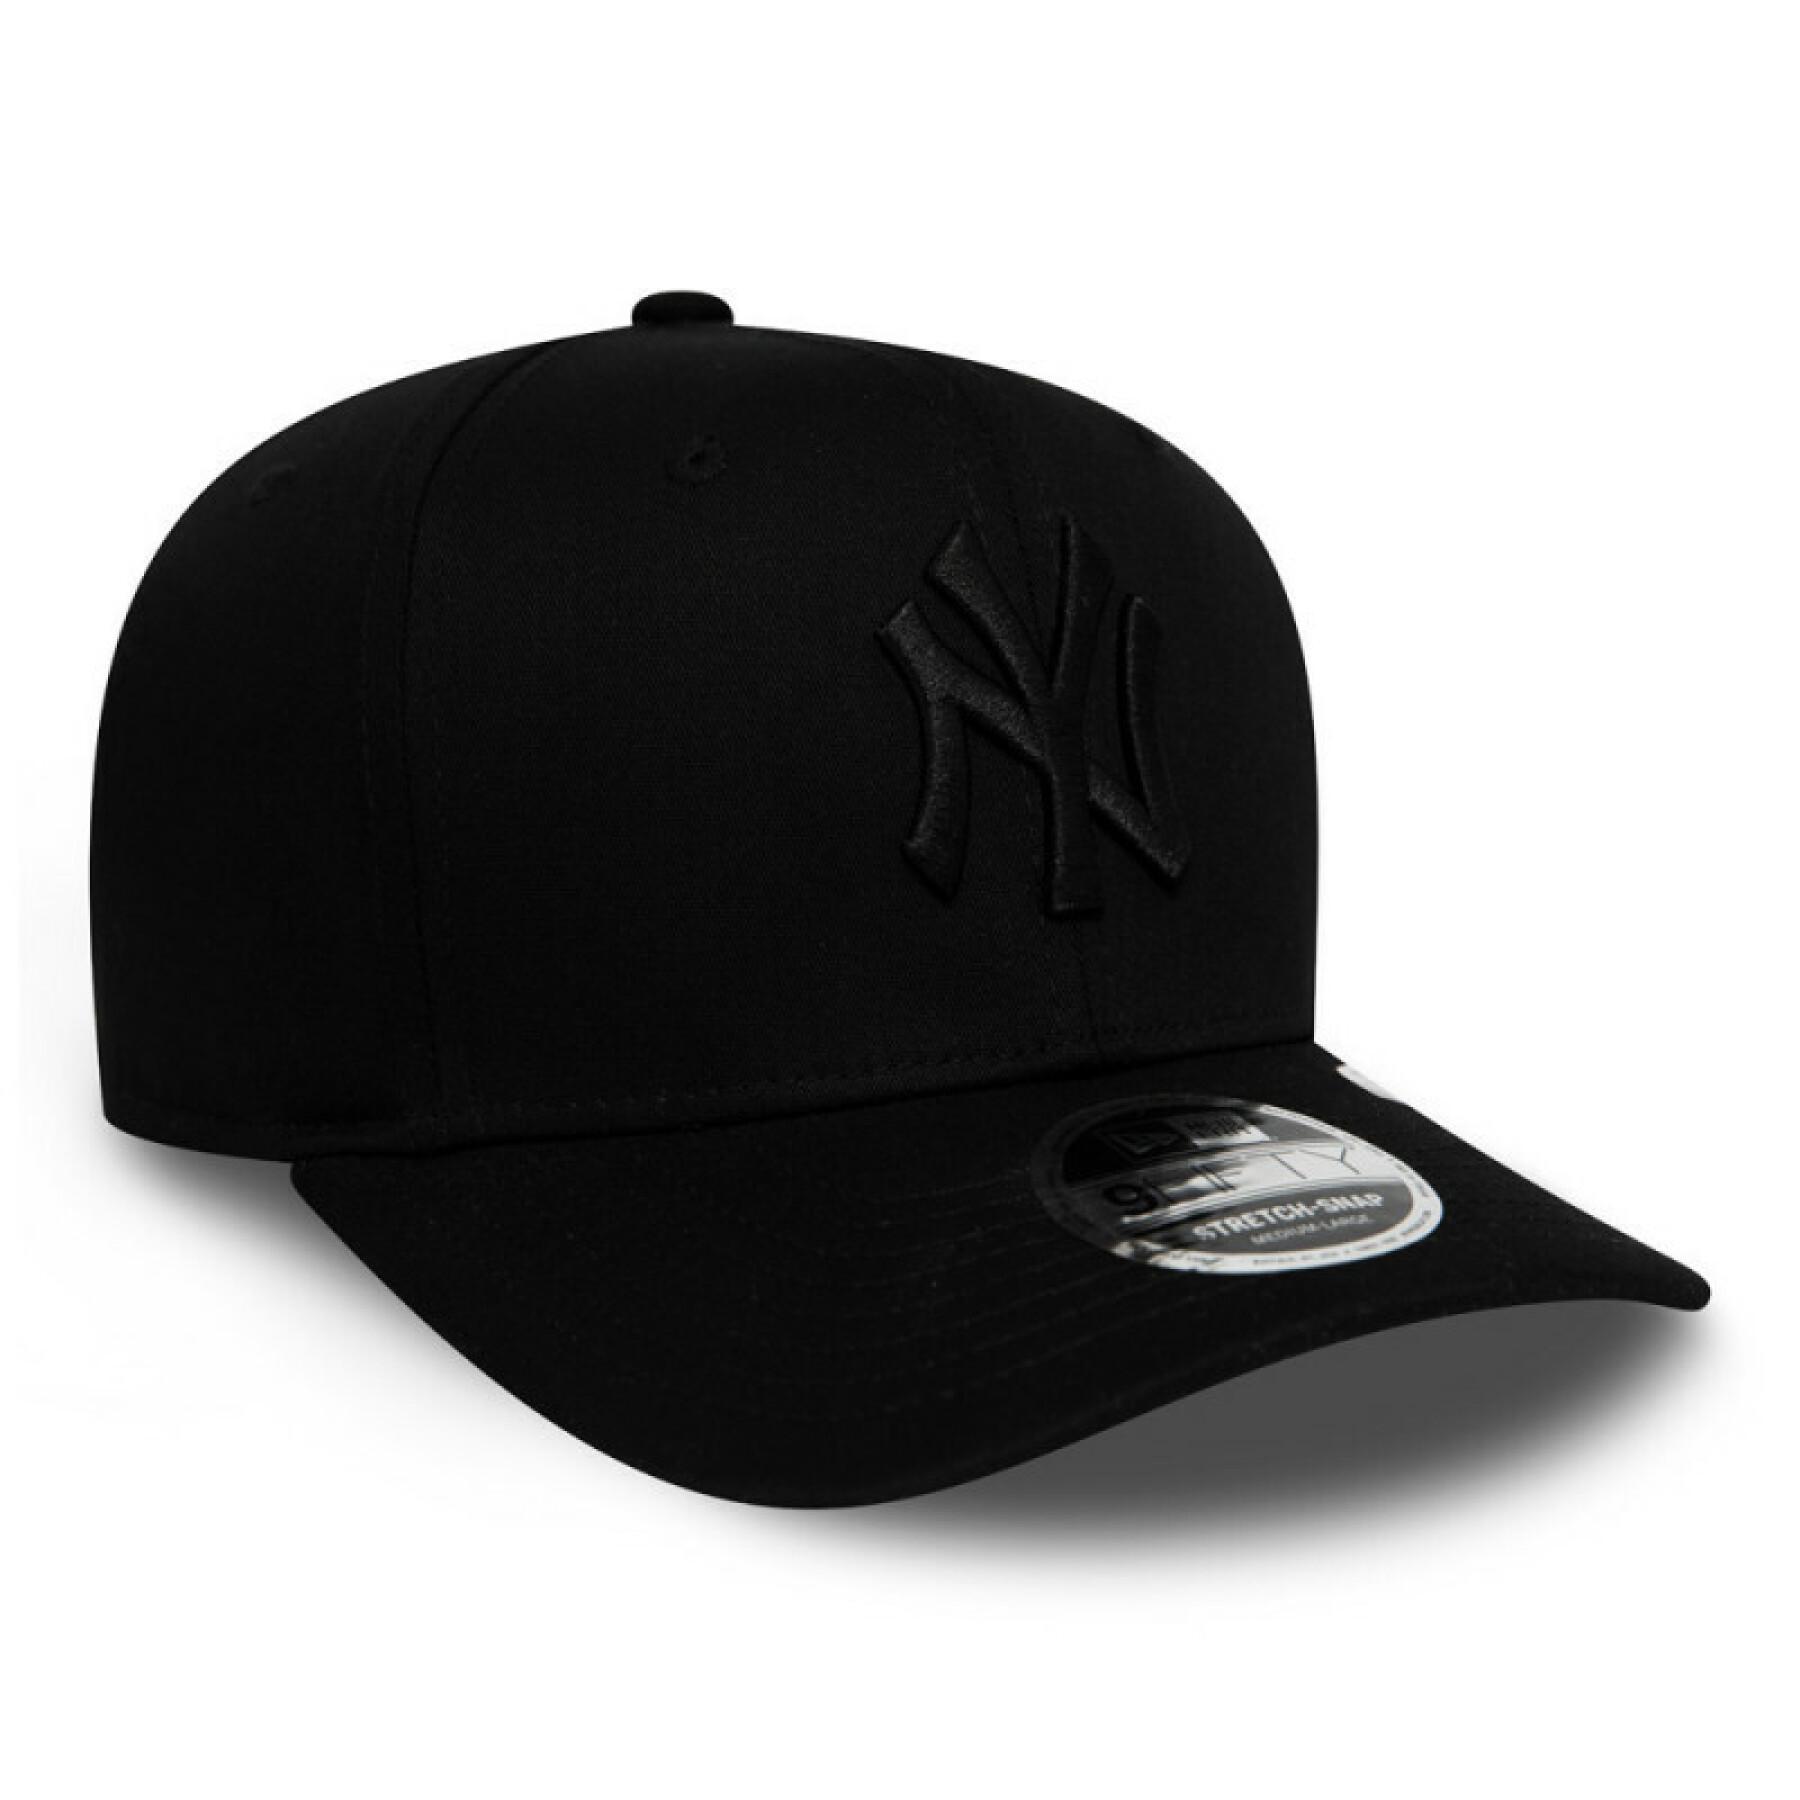 New York Yankees keps 9fifty